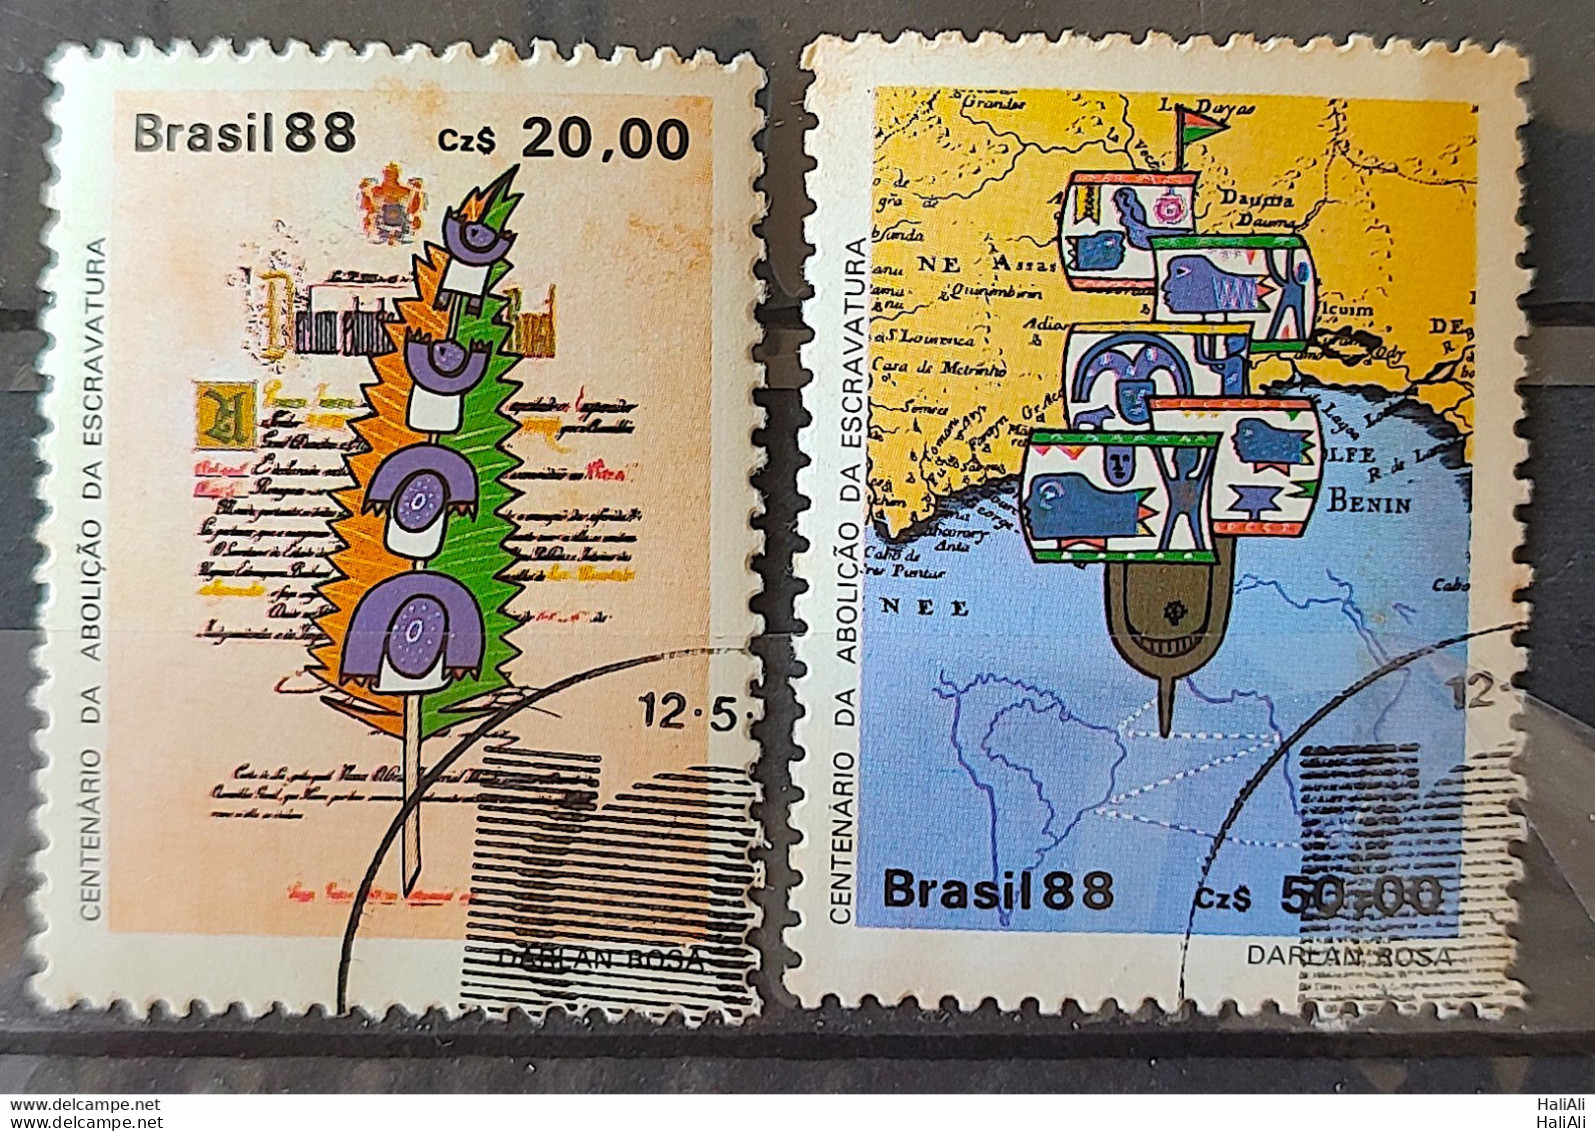 C 1583 Brazil Stamp 100 Years Abolition Of Slavery Law Aurea Ship Slave 1988 Complete Series Circulated 5 - Usati